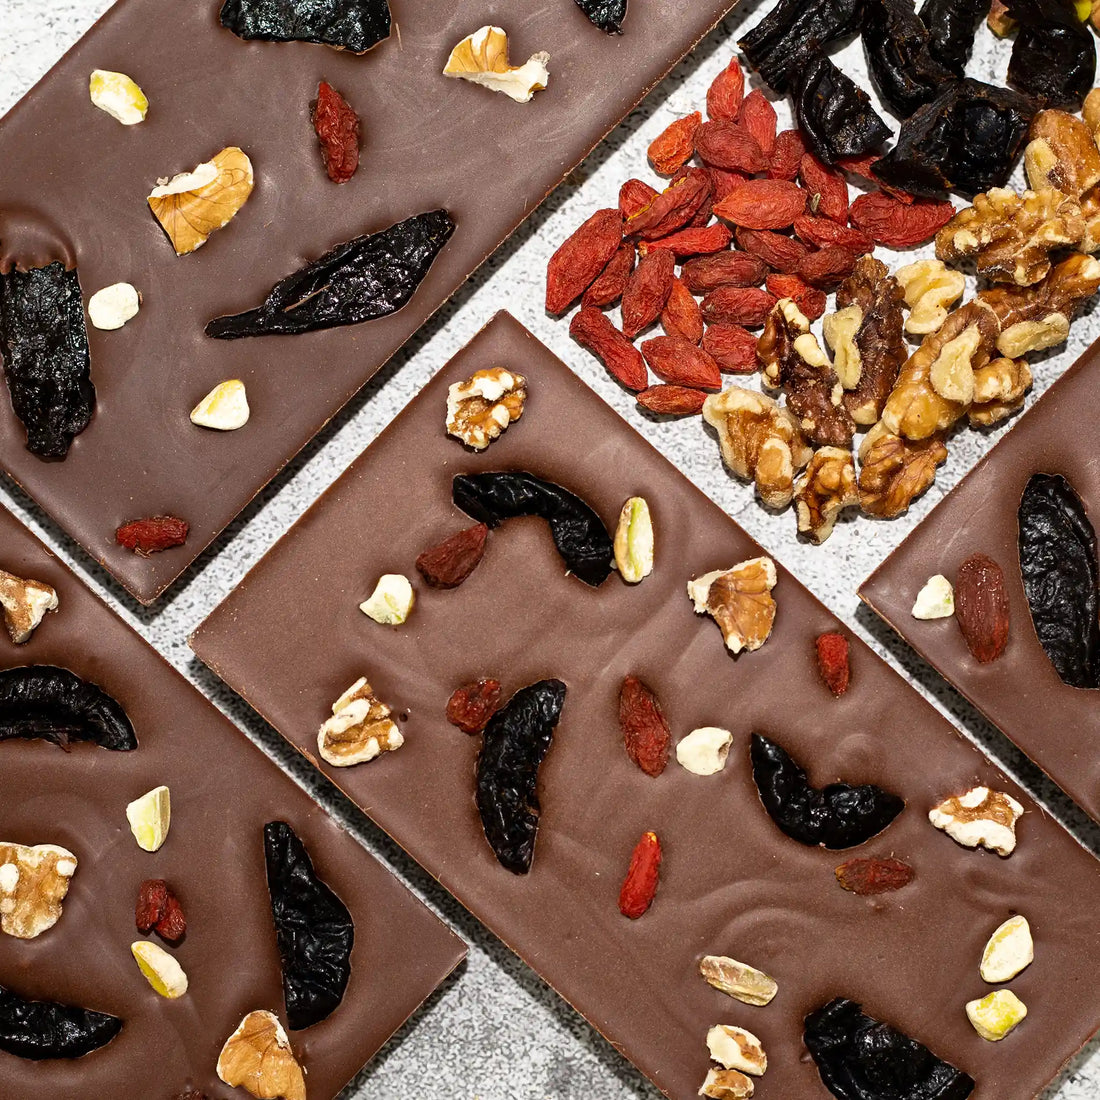 Sweet Fantasy - front and back of Milk Chocolate Bar with Prunes, Goji Berries, Walnuts, and Pistachios